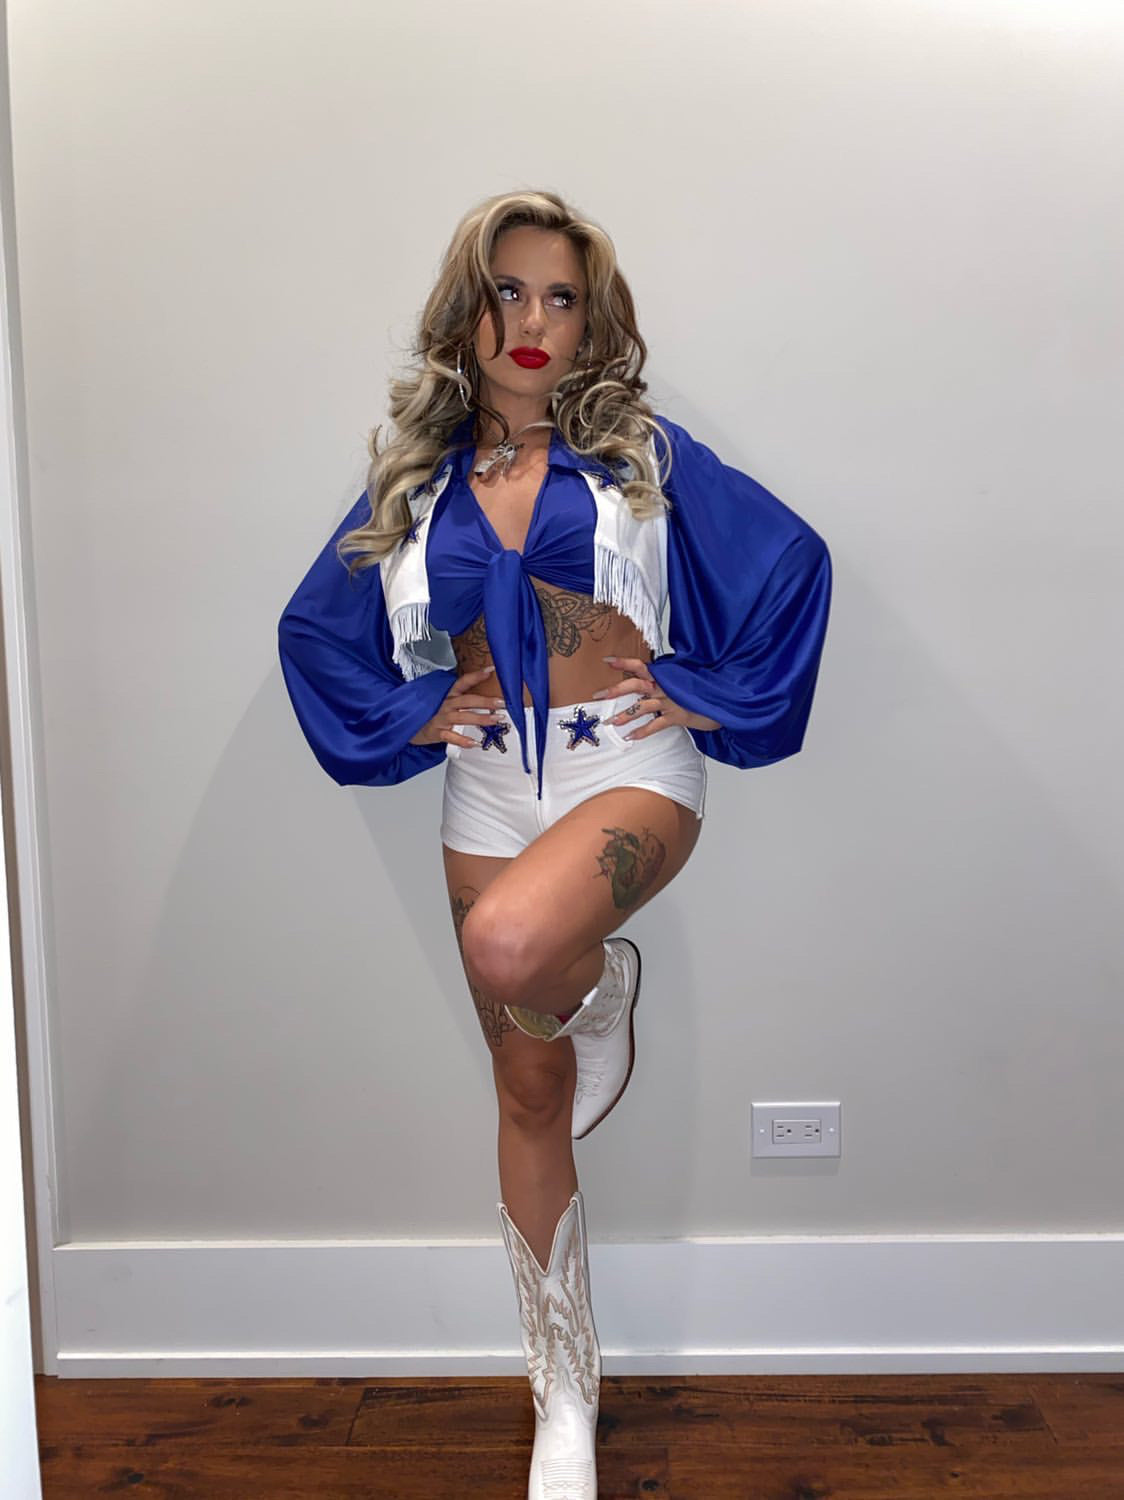 Cowboys Cheerleader Costume - Not Endorsed or affiliated with the nfl inspired costume only